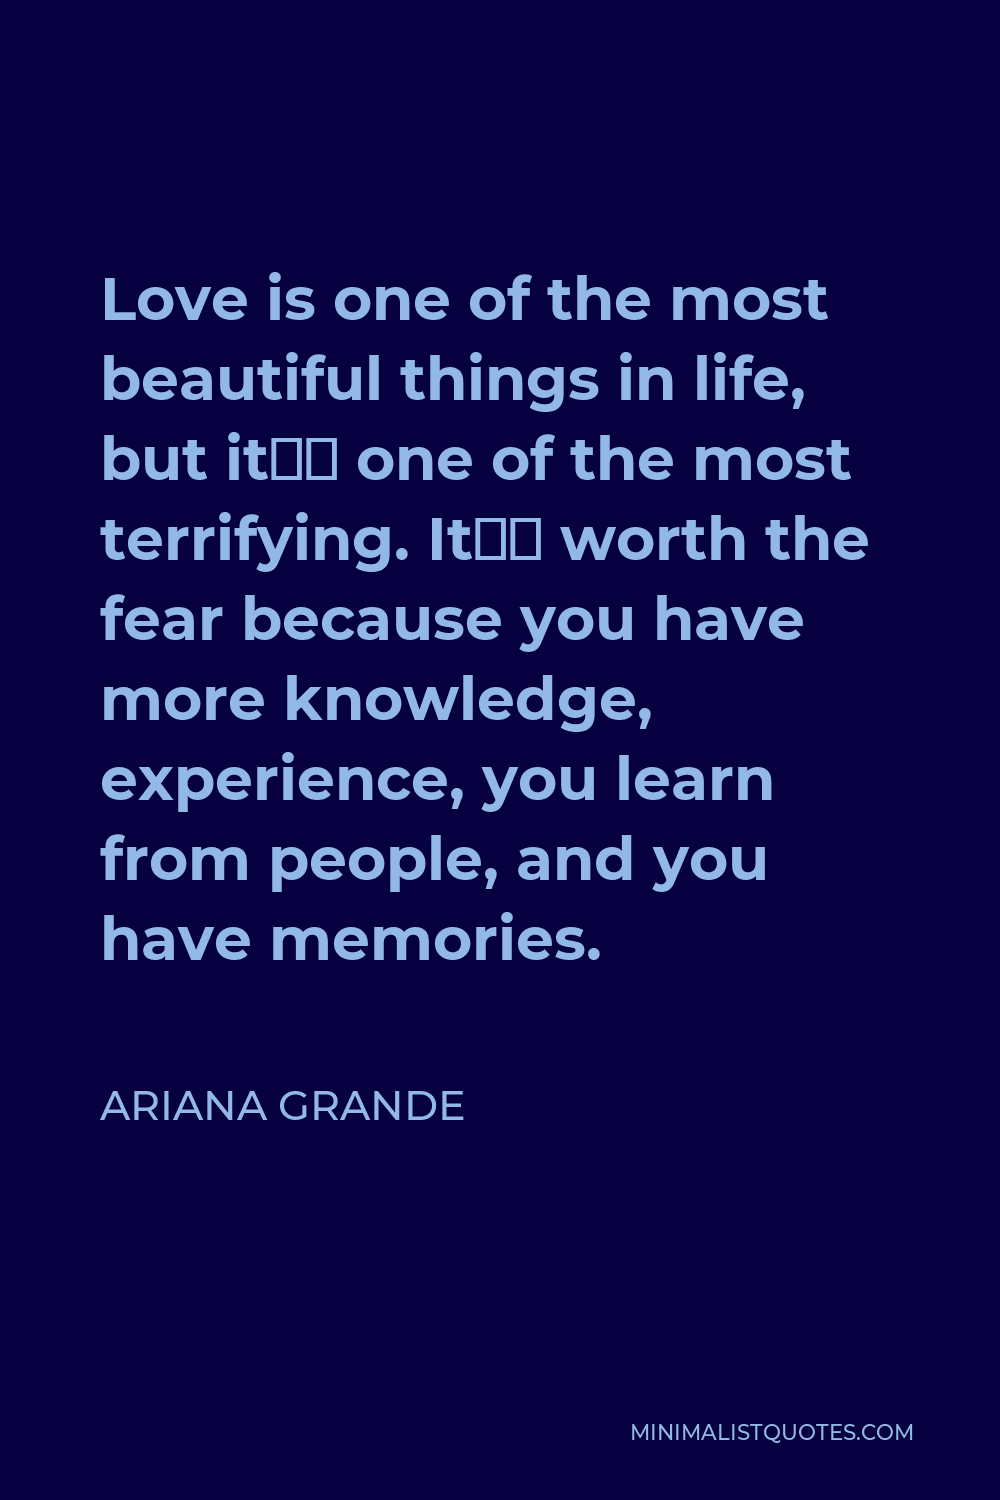 Ariana Grande Quote: Love is one of the most beautiful things in ...